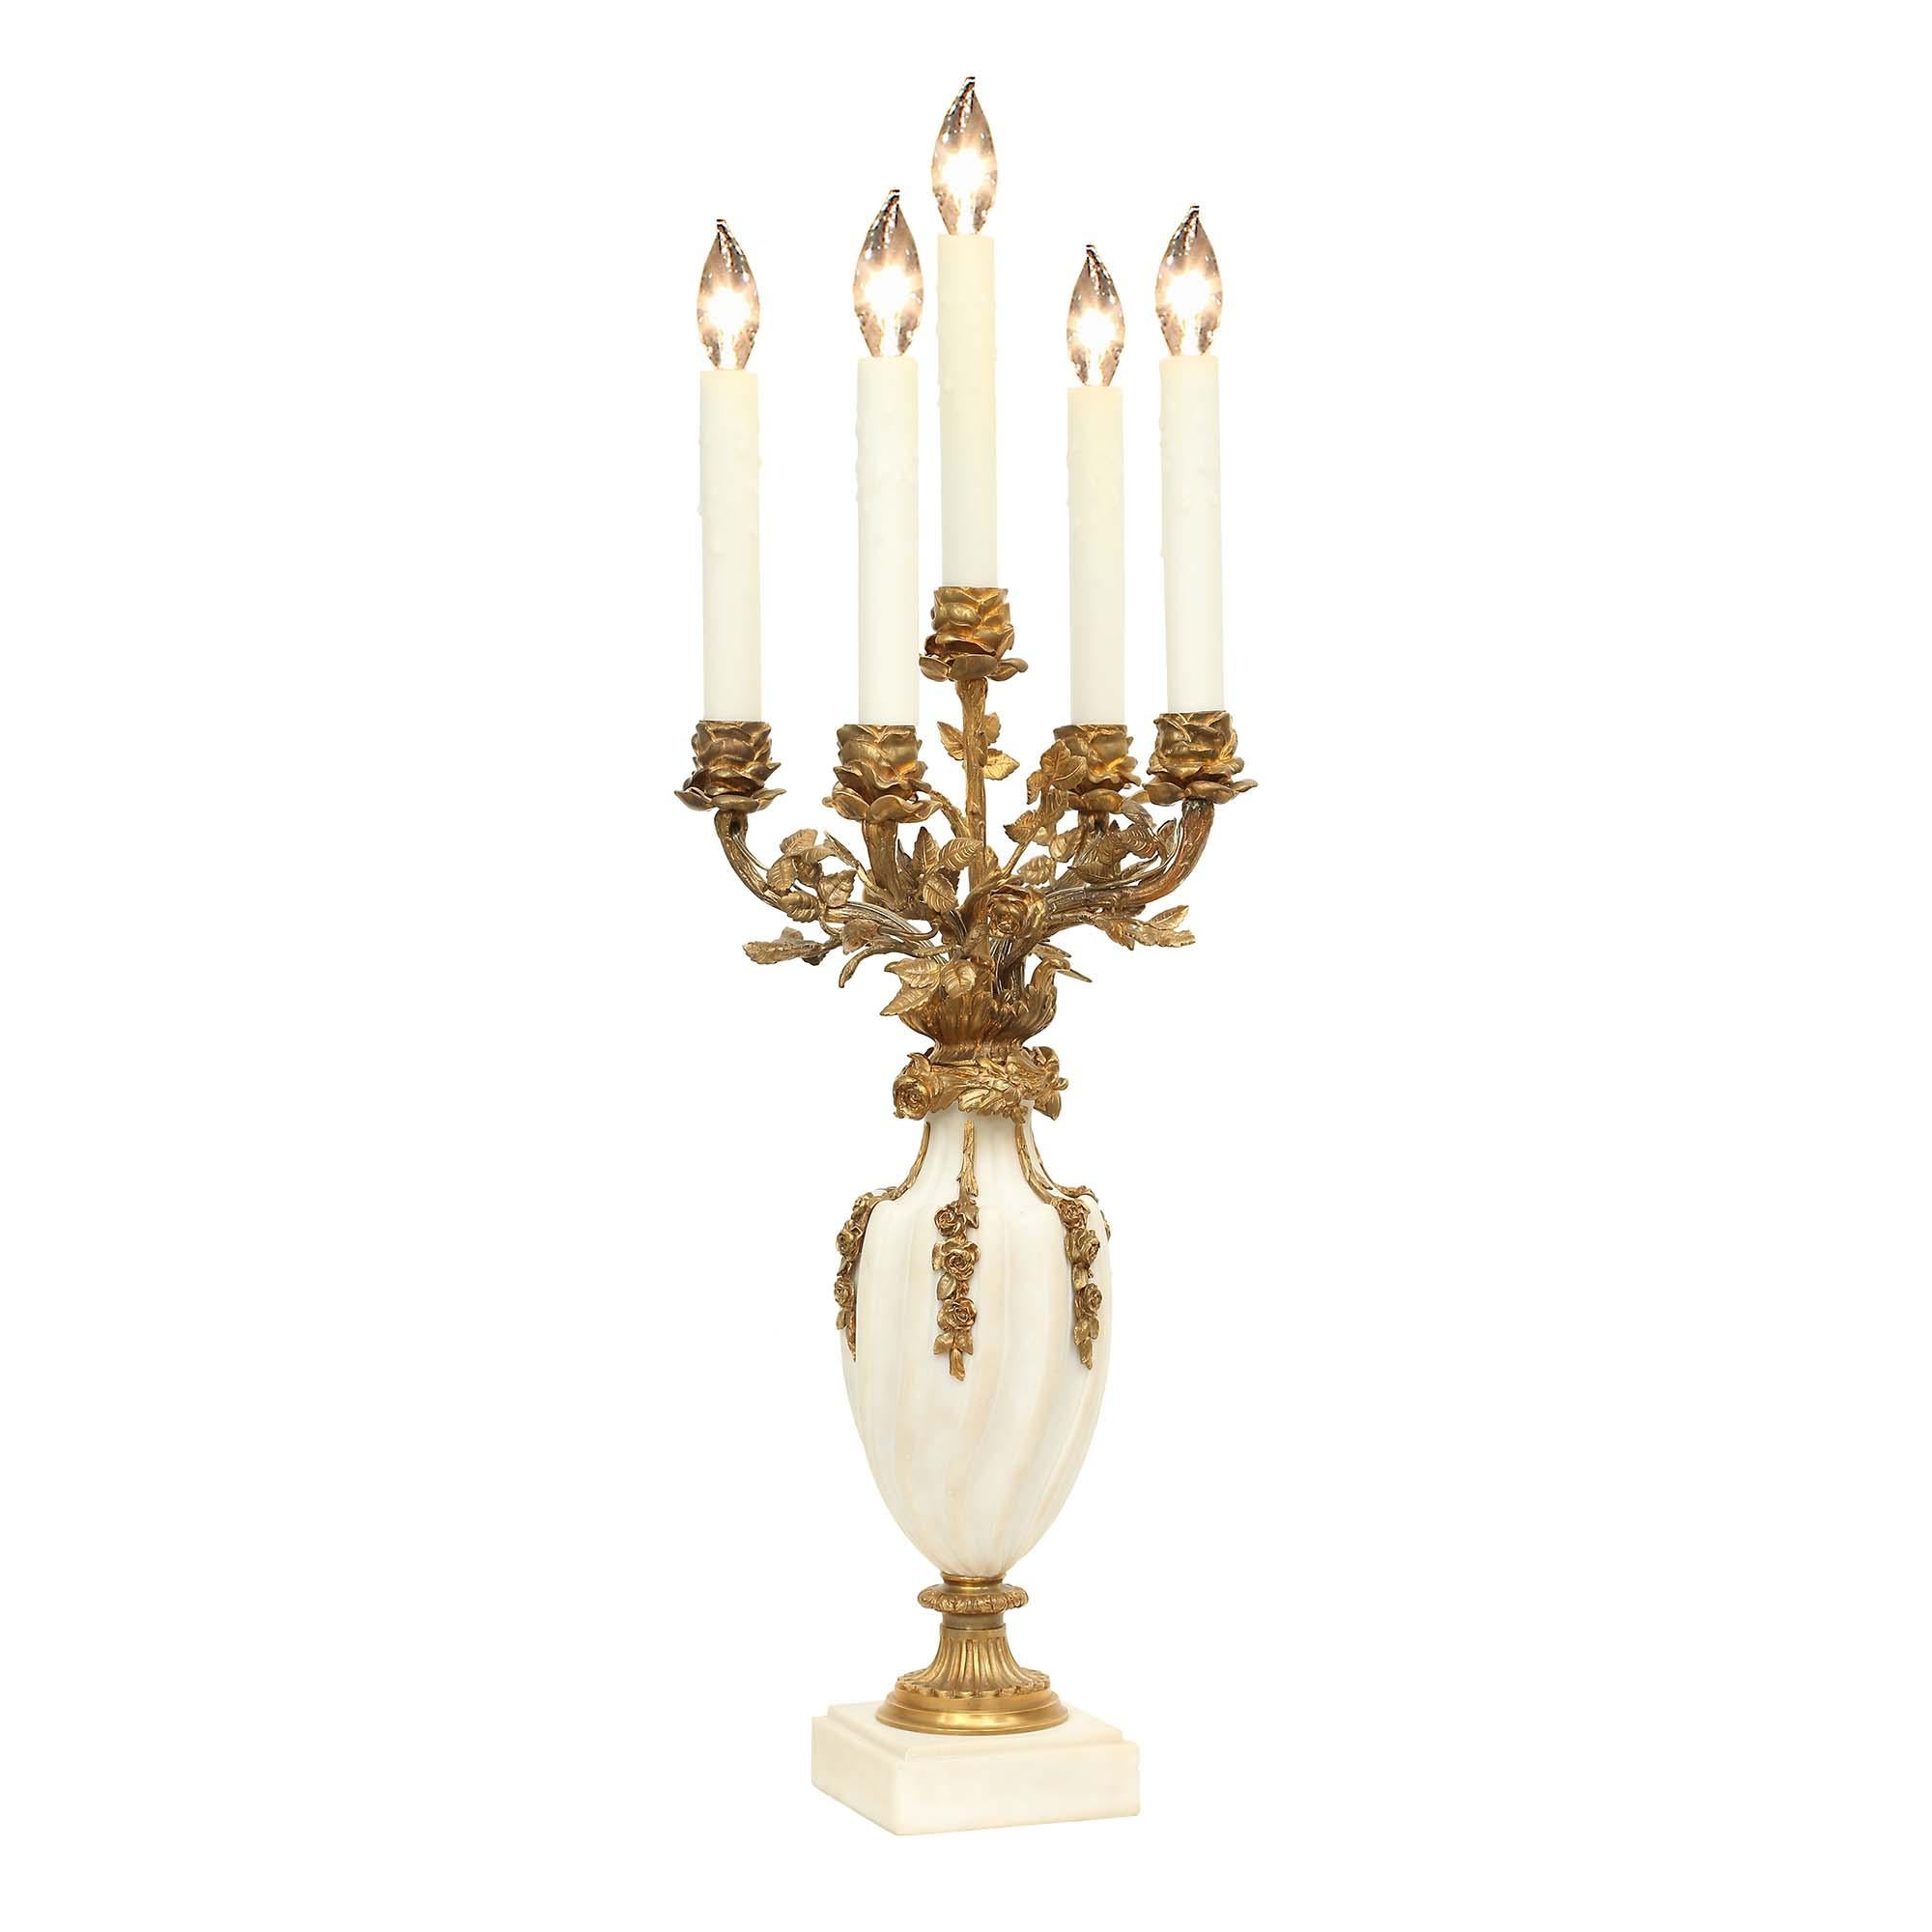 An elegant pair of French Louis XVI st. white Carrara marble and richly chased ormolu five-arm candelabras mounted into lamps. The pair is raised by a square base below an ormolu fluted base, supporting a spiral fluted design urn with floral ormolu